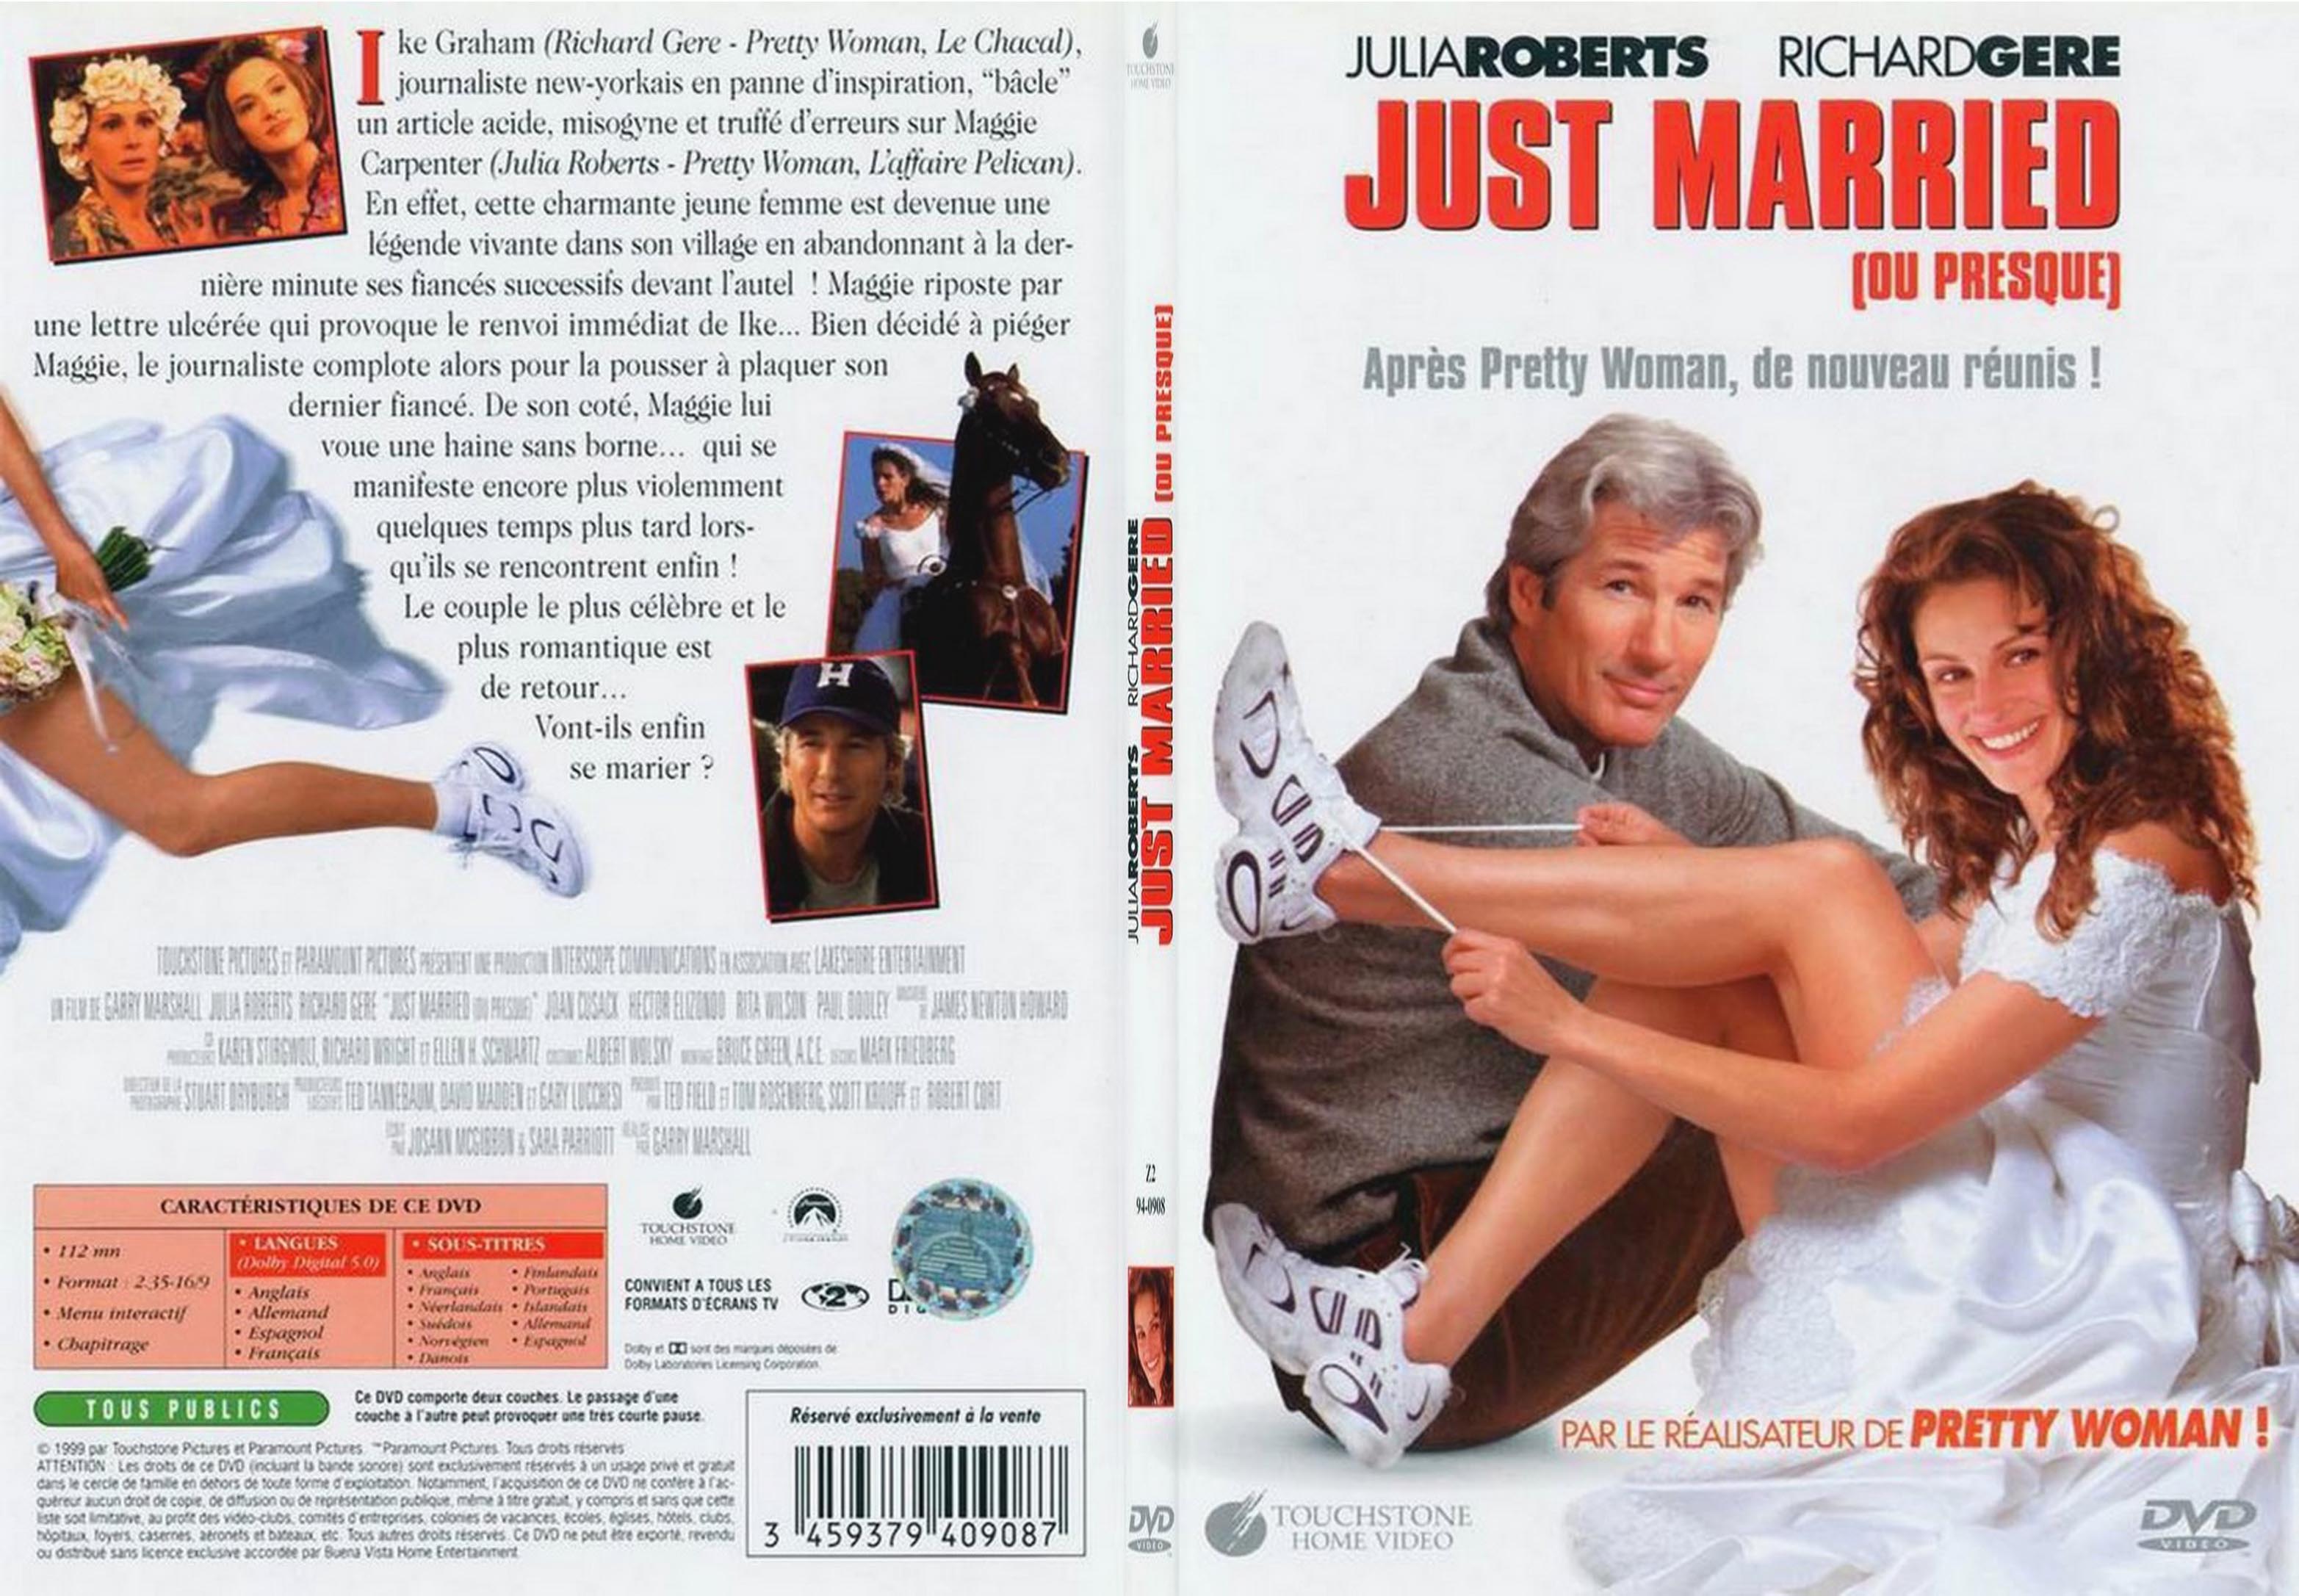 Jaquette DVD Just Married - SLIM